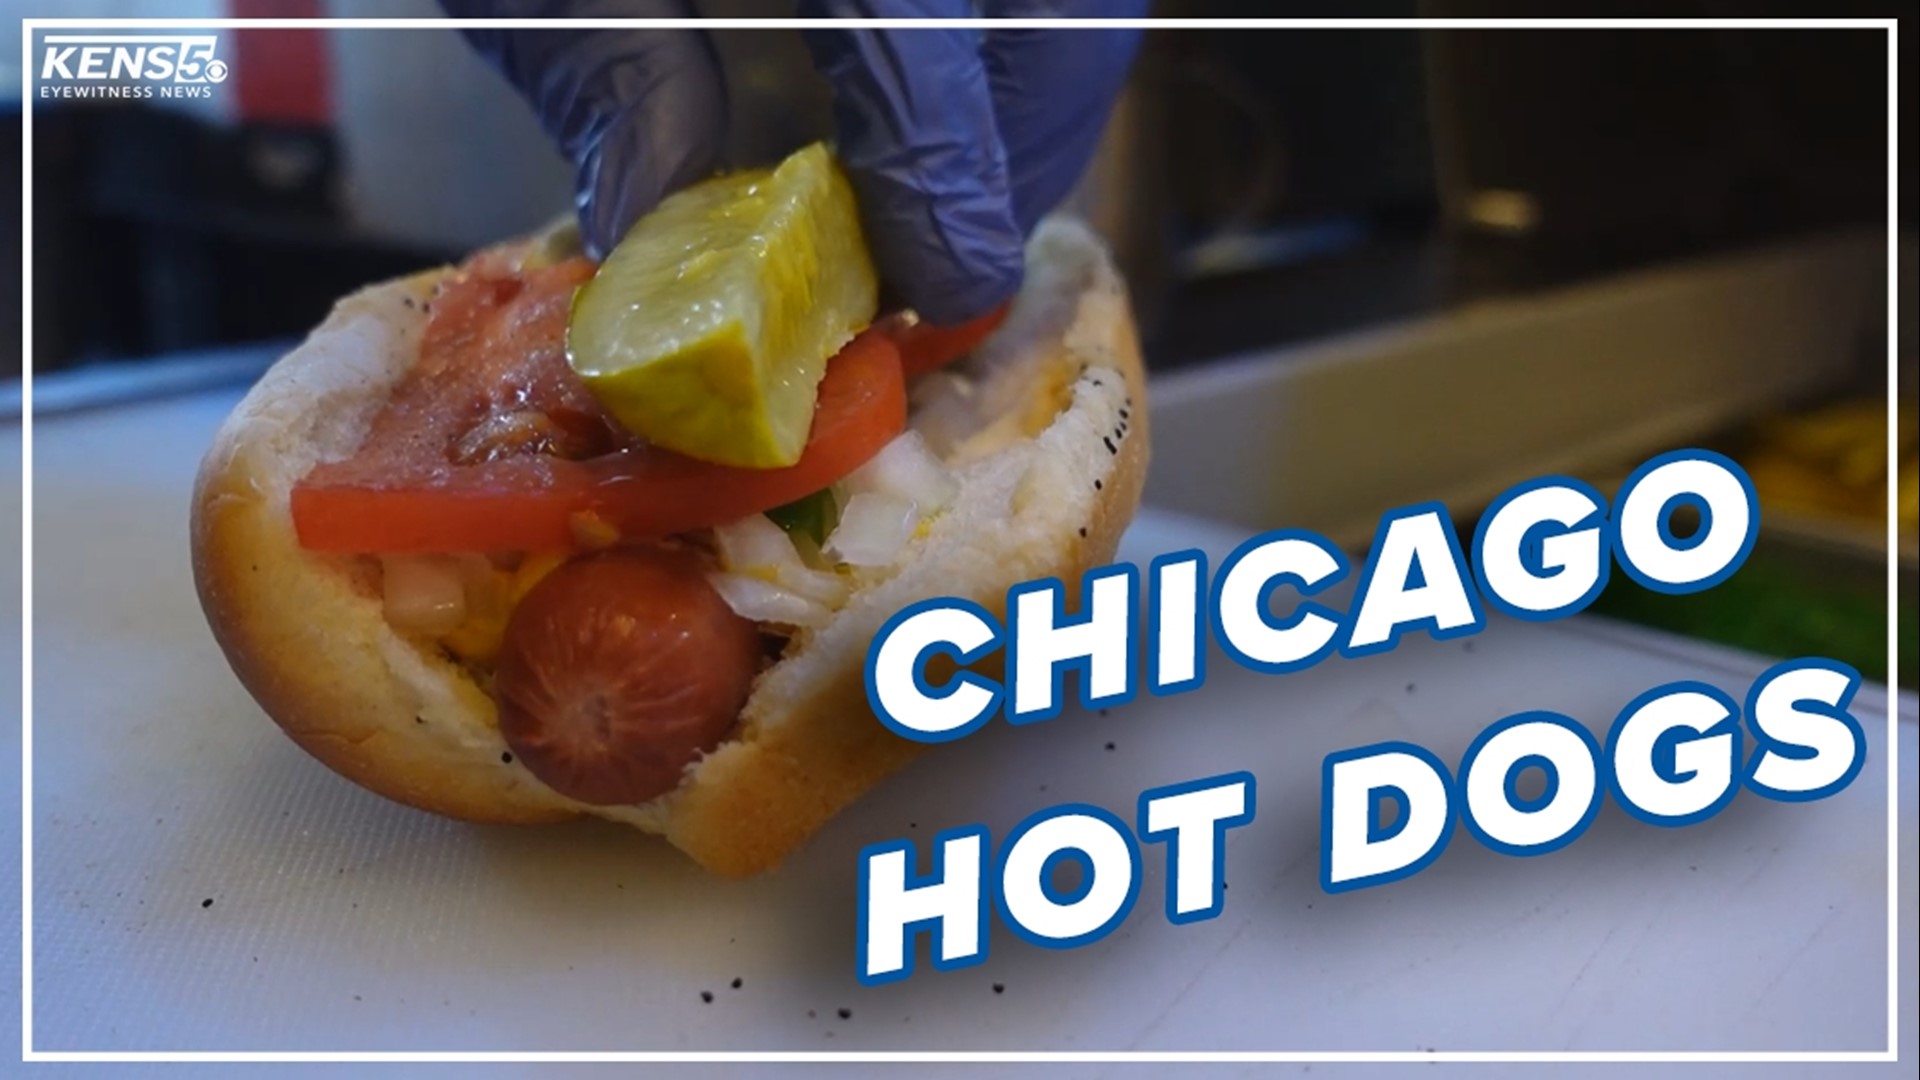 No need to go to Chicago when you can get the authentic hot dogs here in the 210.